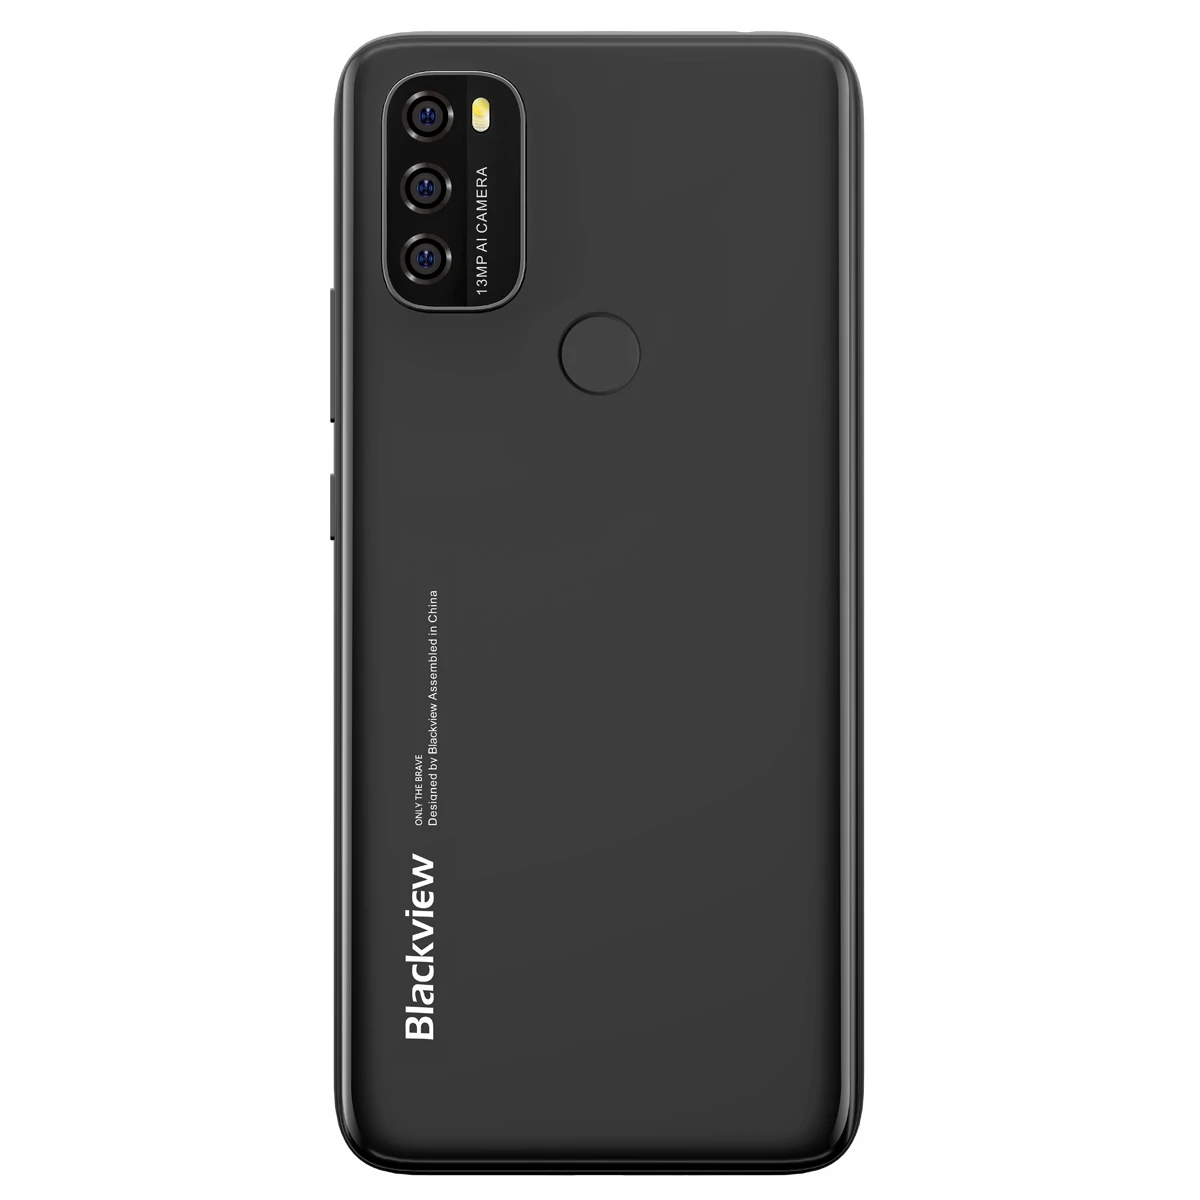 Find Blackview A70 Pro Global Version 6 517 inch 5380mAh Android 11 0 4GB 32GB T310 4G Smartphone for Sale on Gipsybee.com